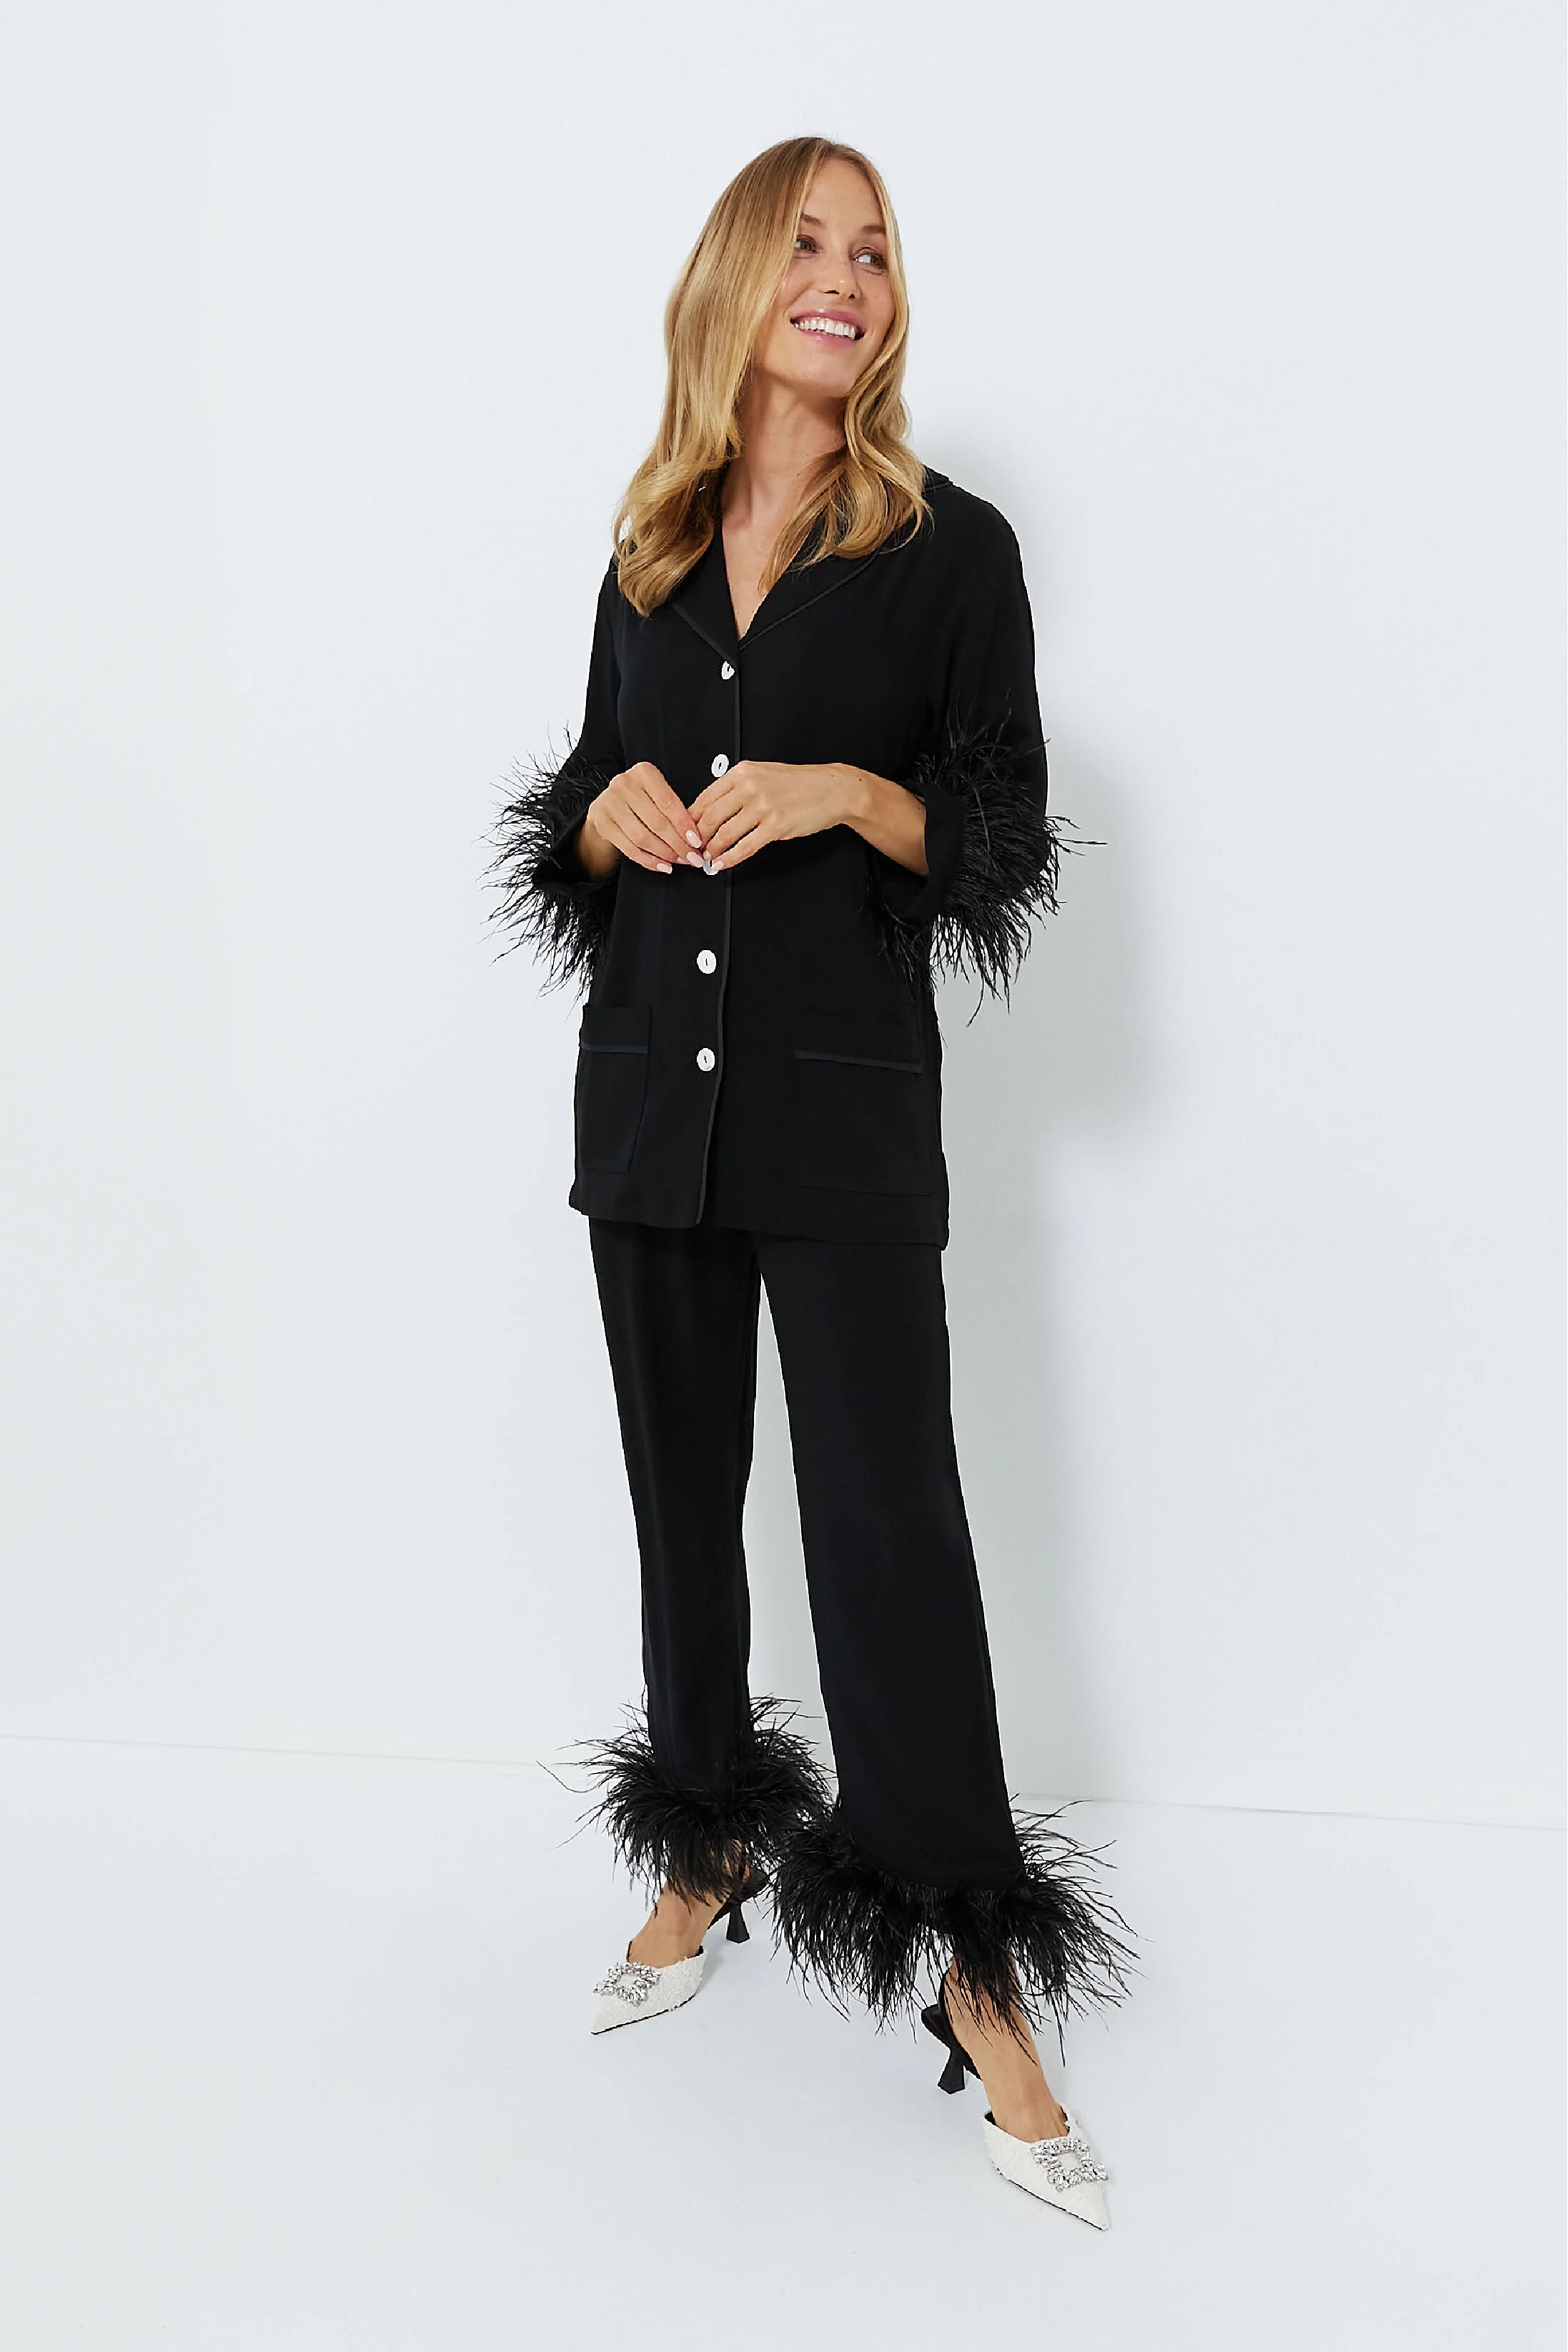 Black Party Pajama Set with Feathers | Tuckernuck (US)